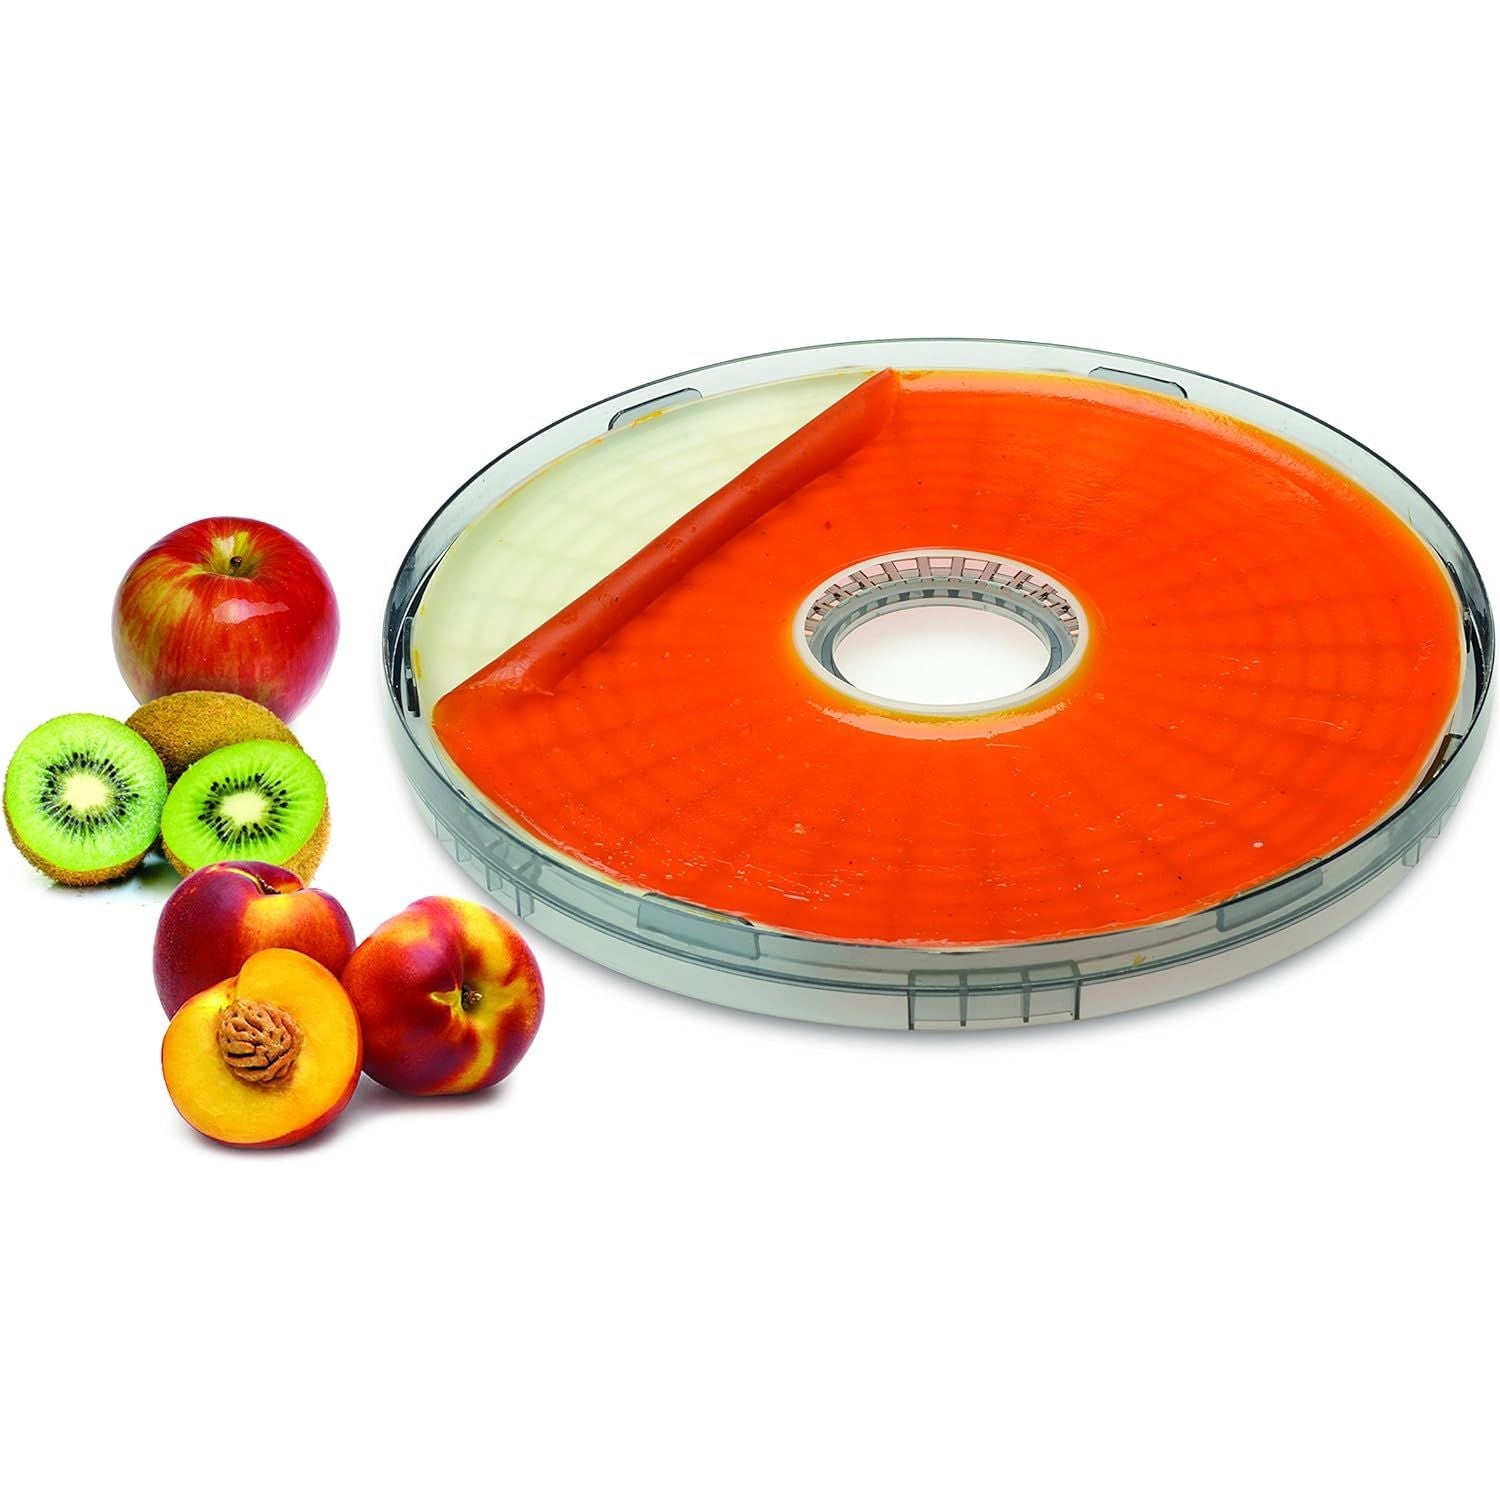 Salton 2 Pack Replacement Food Dehydrator Trays